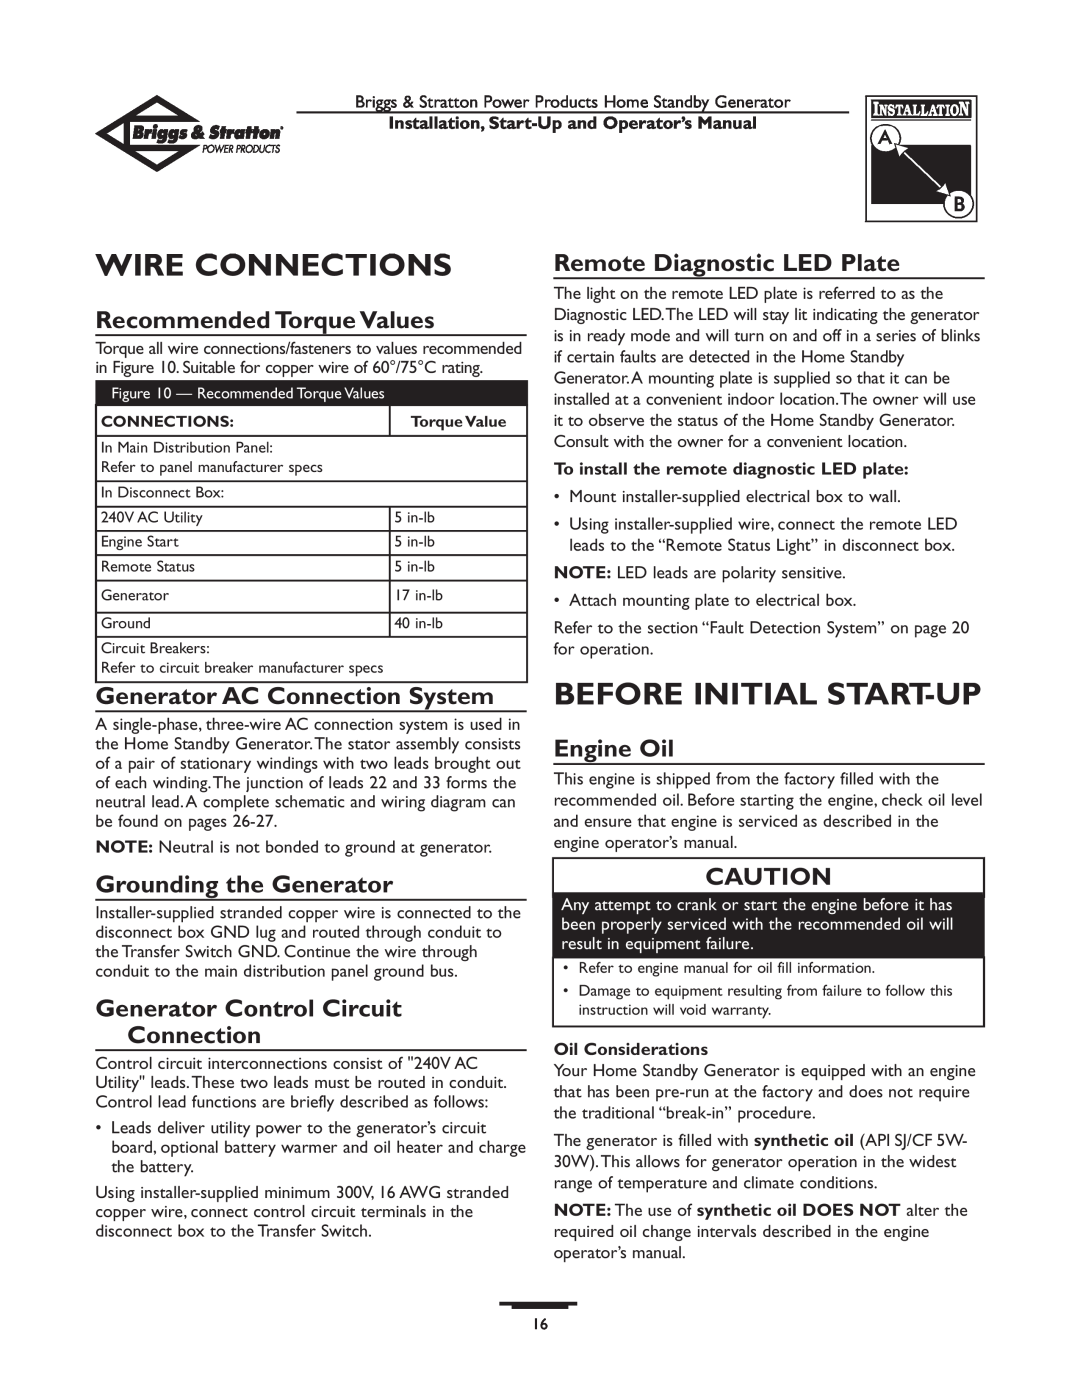 Briggs & Stratton 01897-0 manual Wire Connections, Before Initial Start-Up, Recommended Torque Values, Engine Oil 